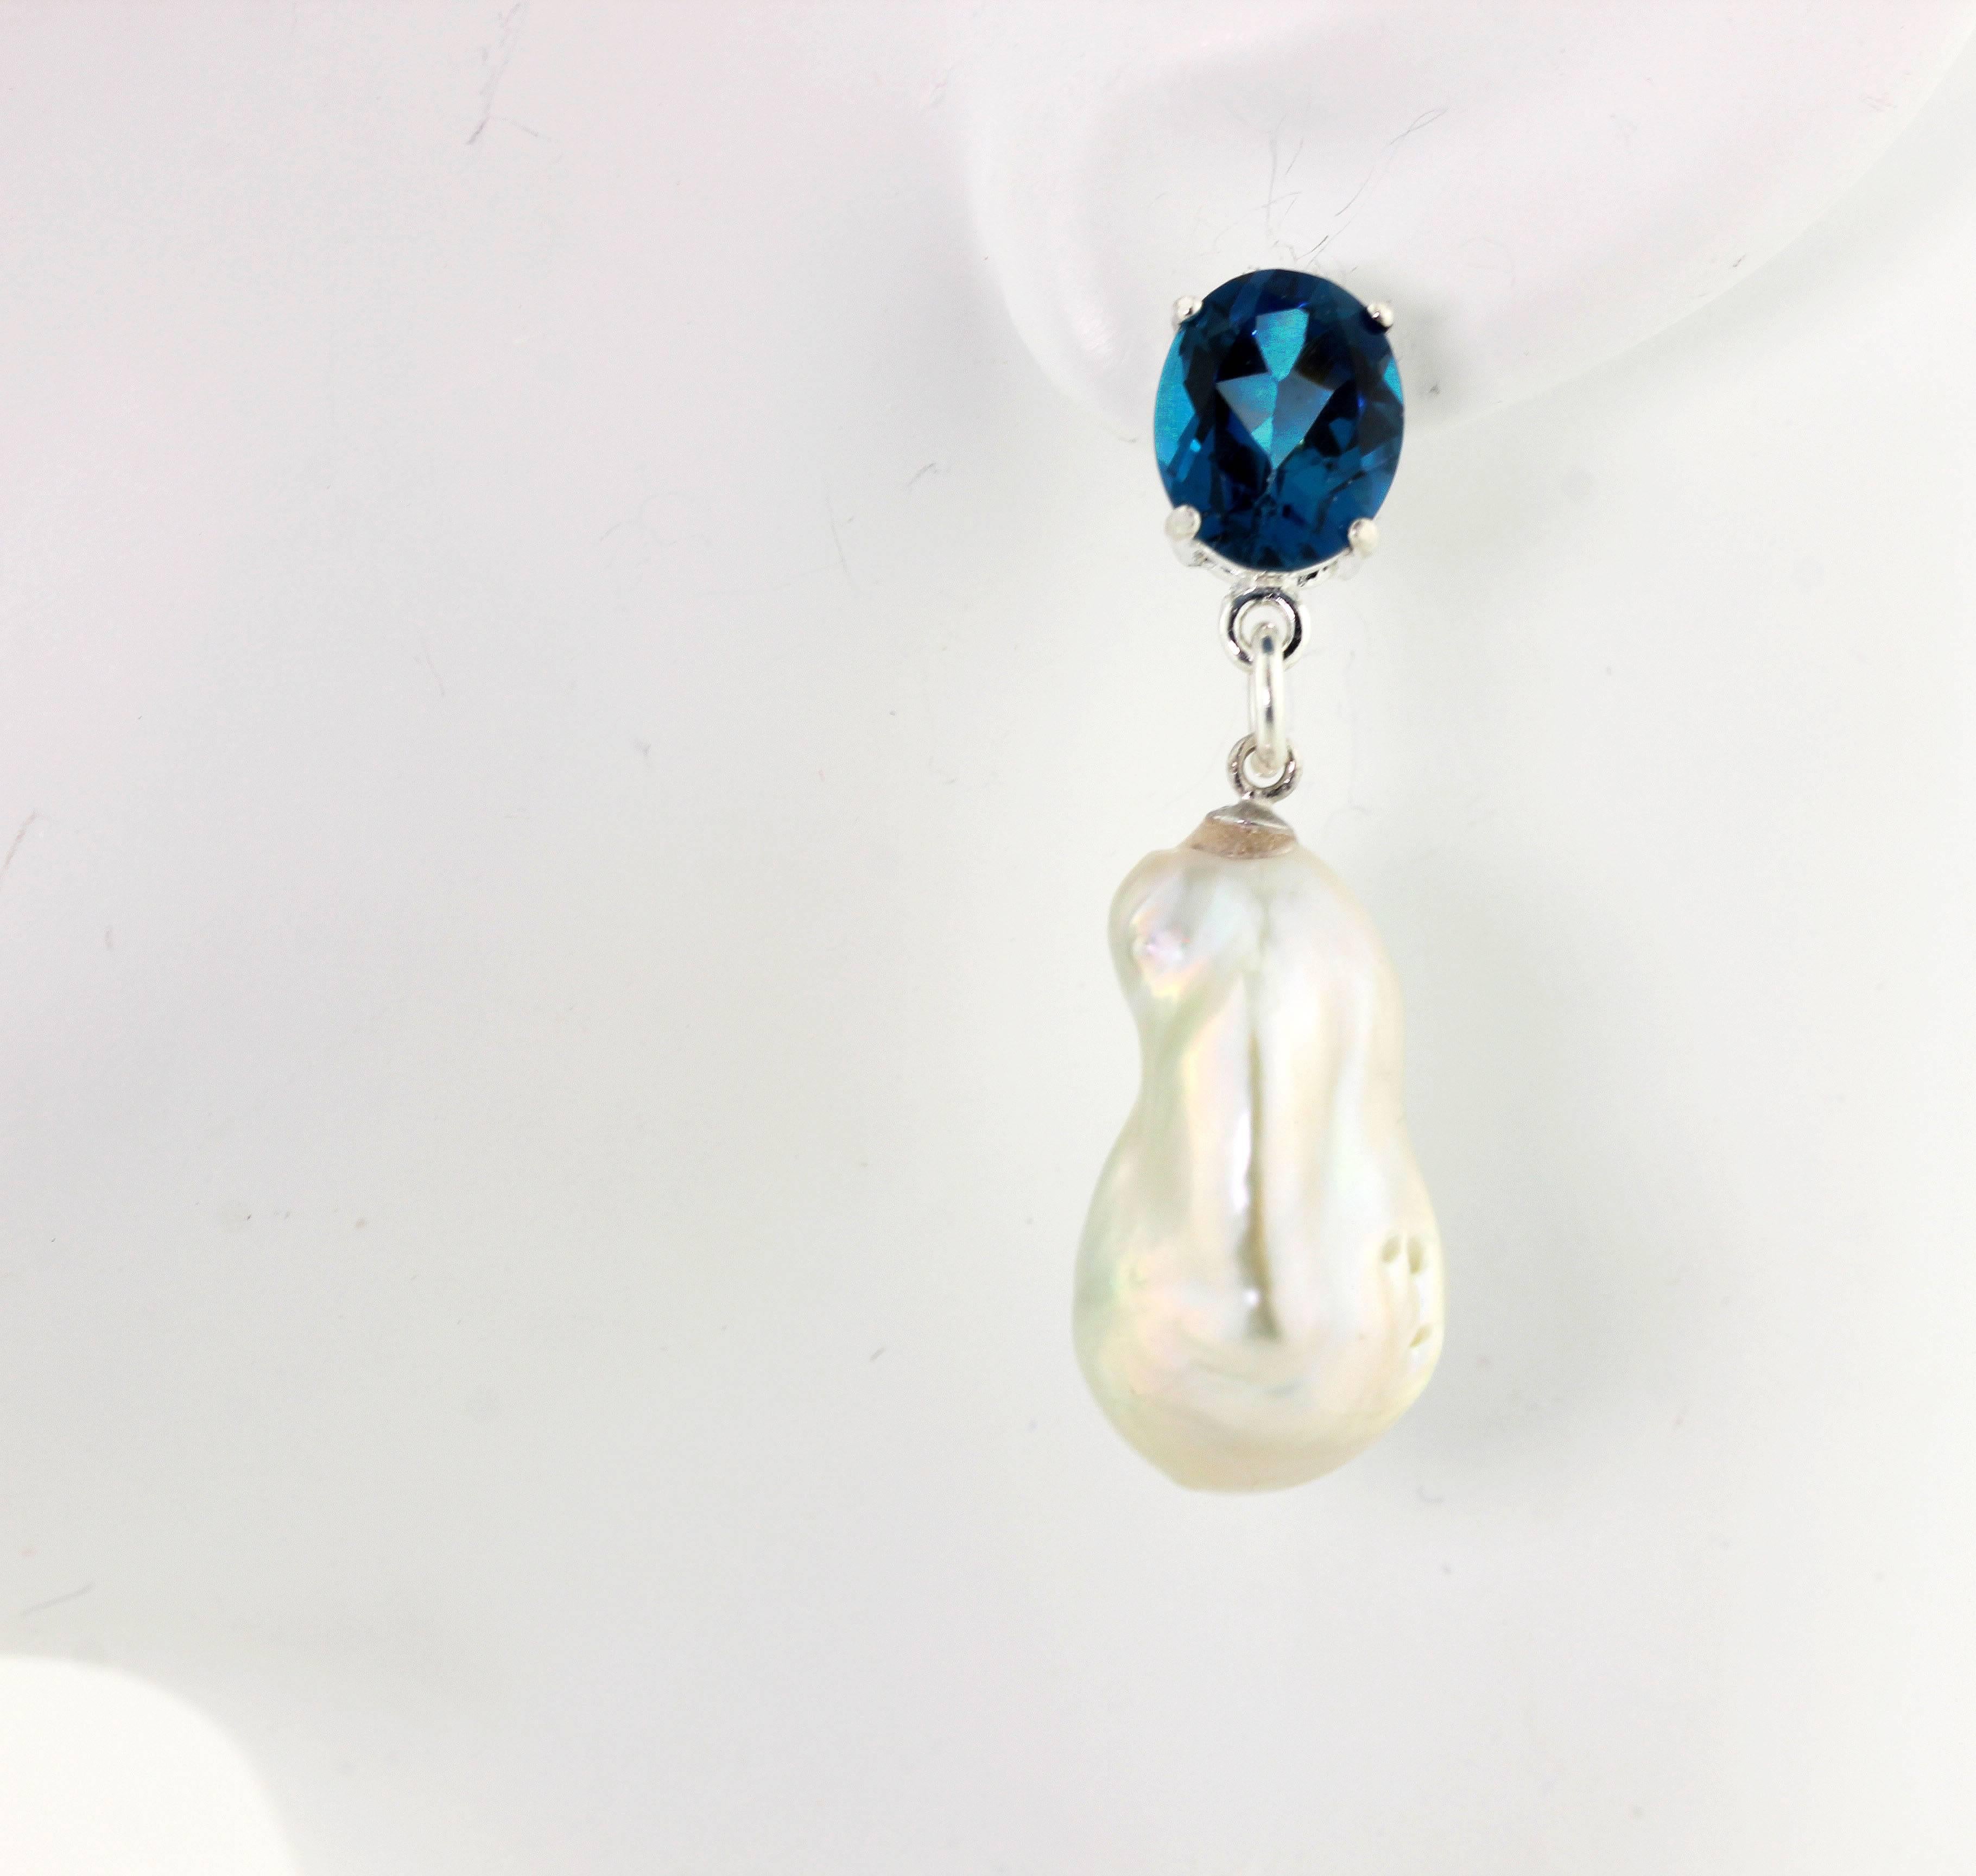 Gorgeous brilliant blue oval Topaz (10 mm x 8 mm) dangle beautiful silvery white cultured baroque Pearls on sterling silver stud earrings.  They hang approximately 1.5 inches long.